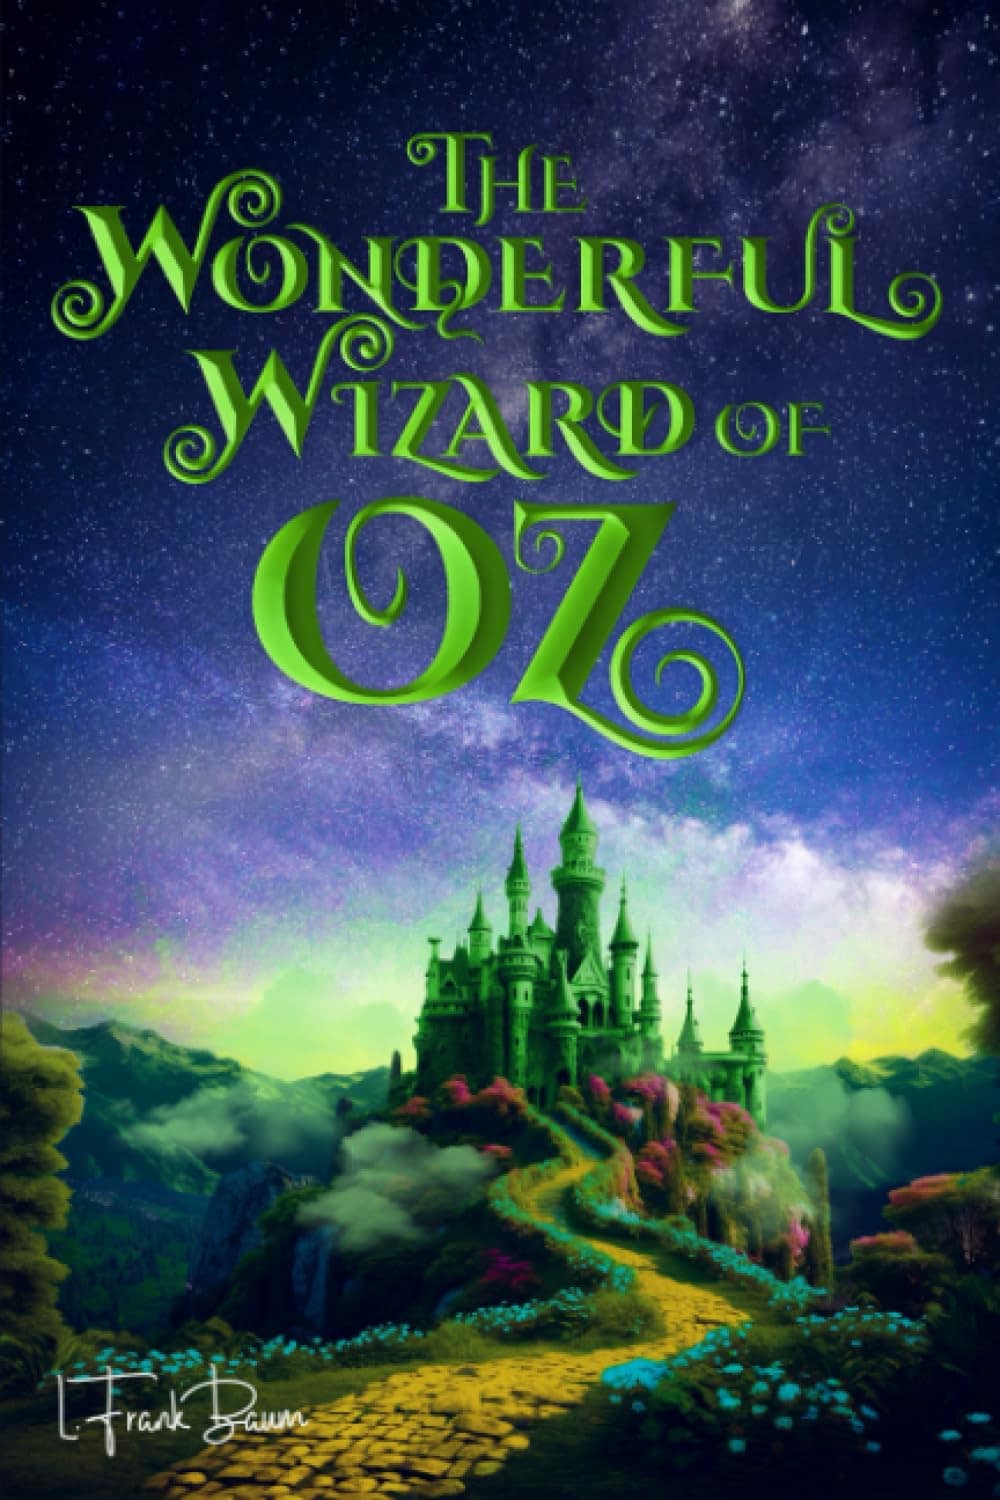 The Wonderful World of Oz, a graphic novel for big kids